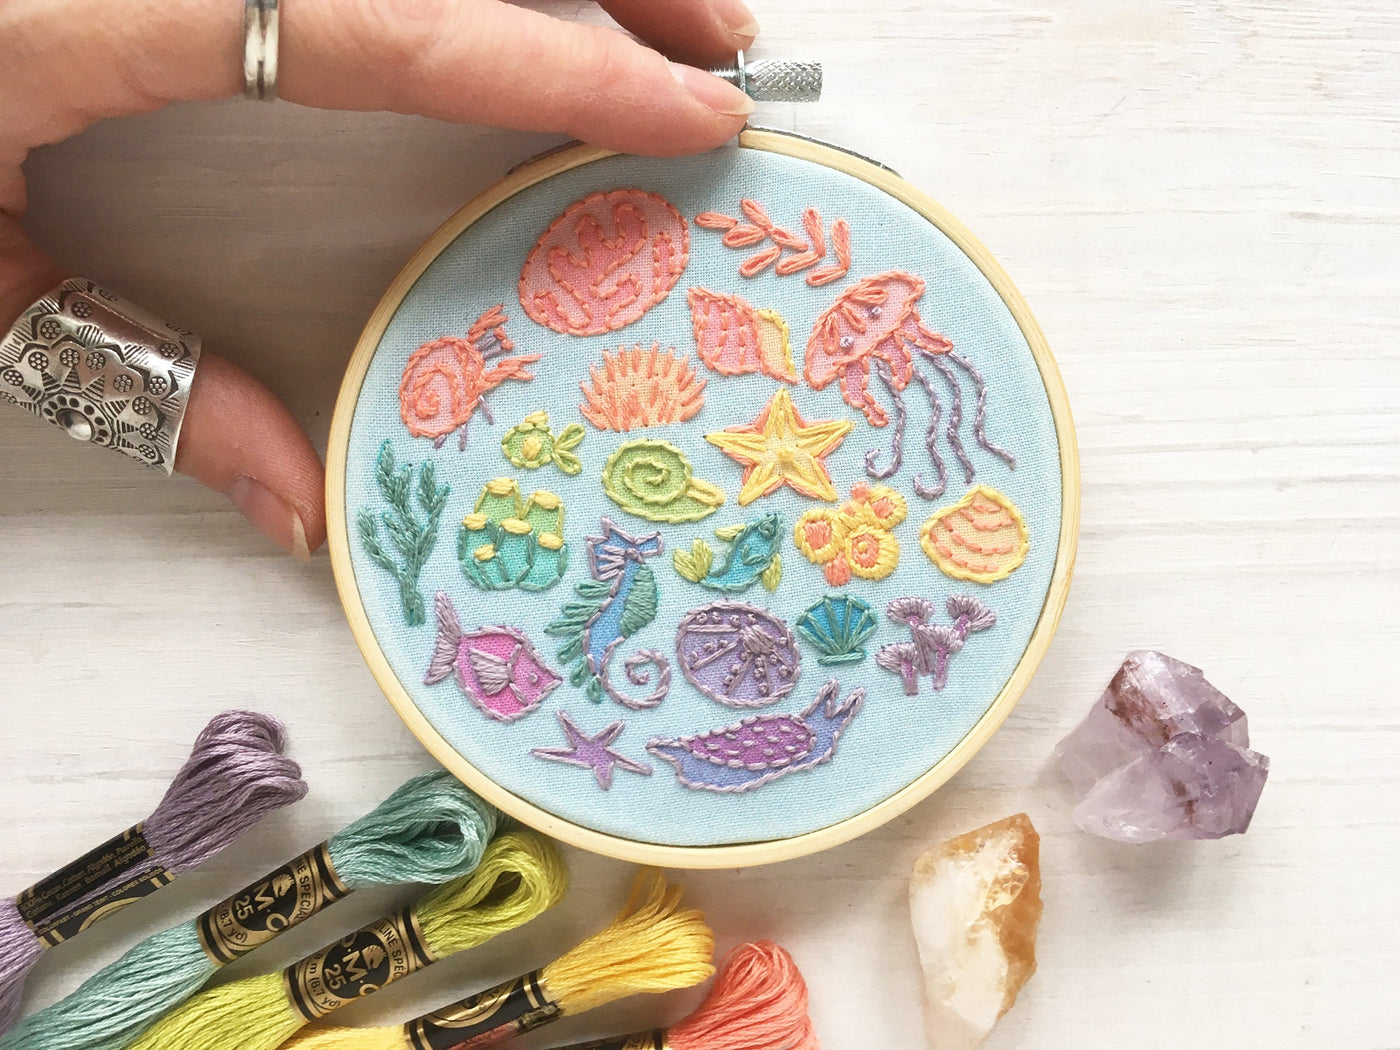 Rainbow Sea Creatures Hand Embroidery pattern download